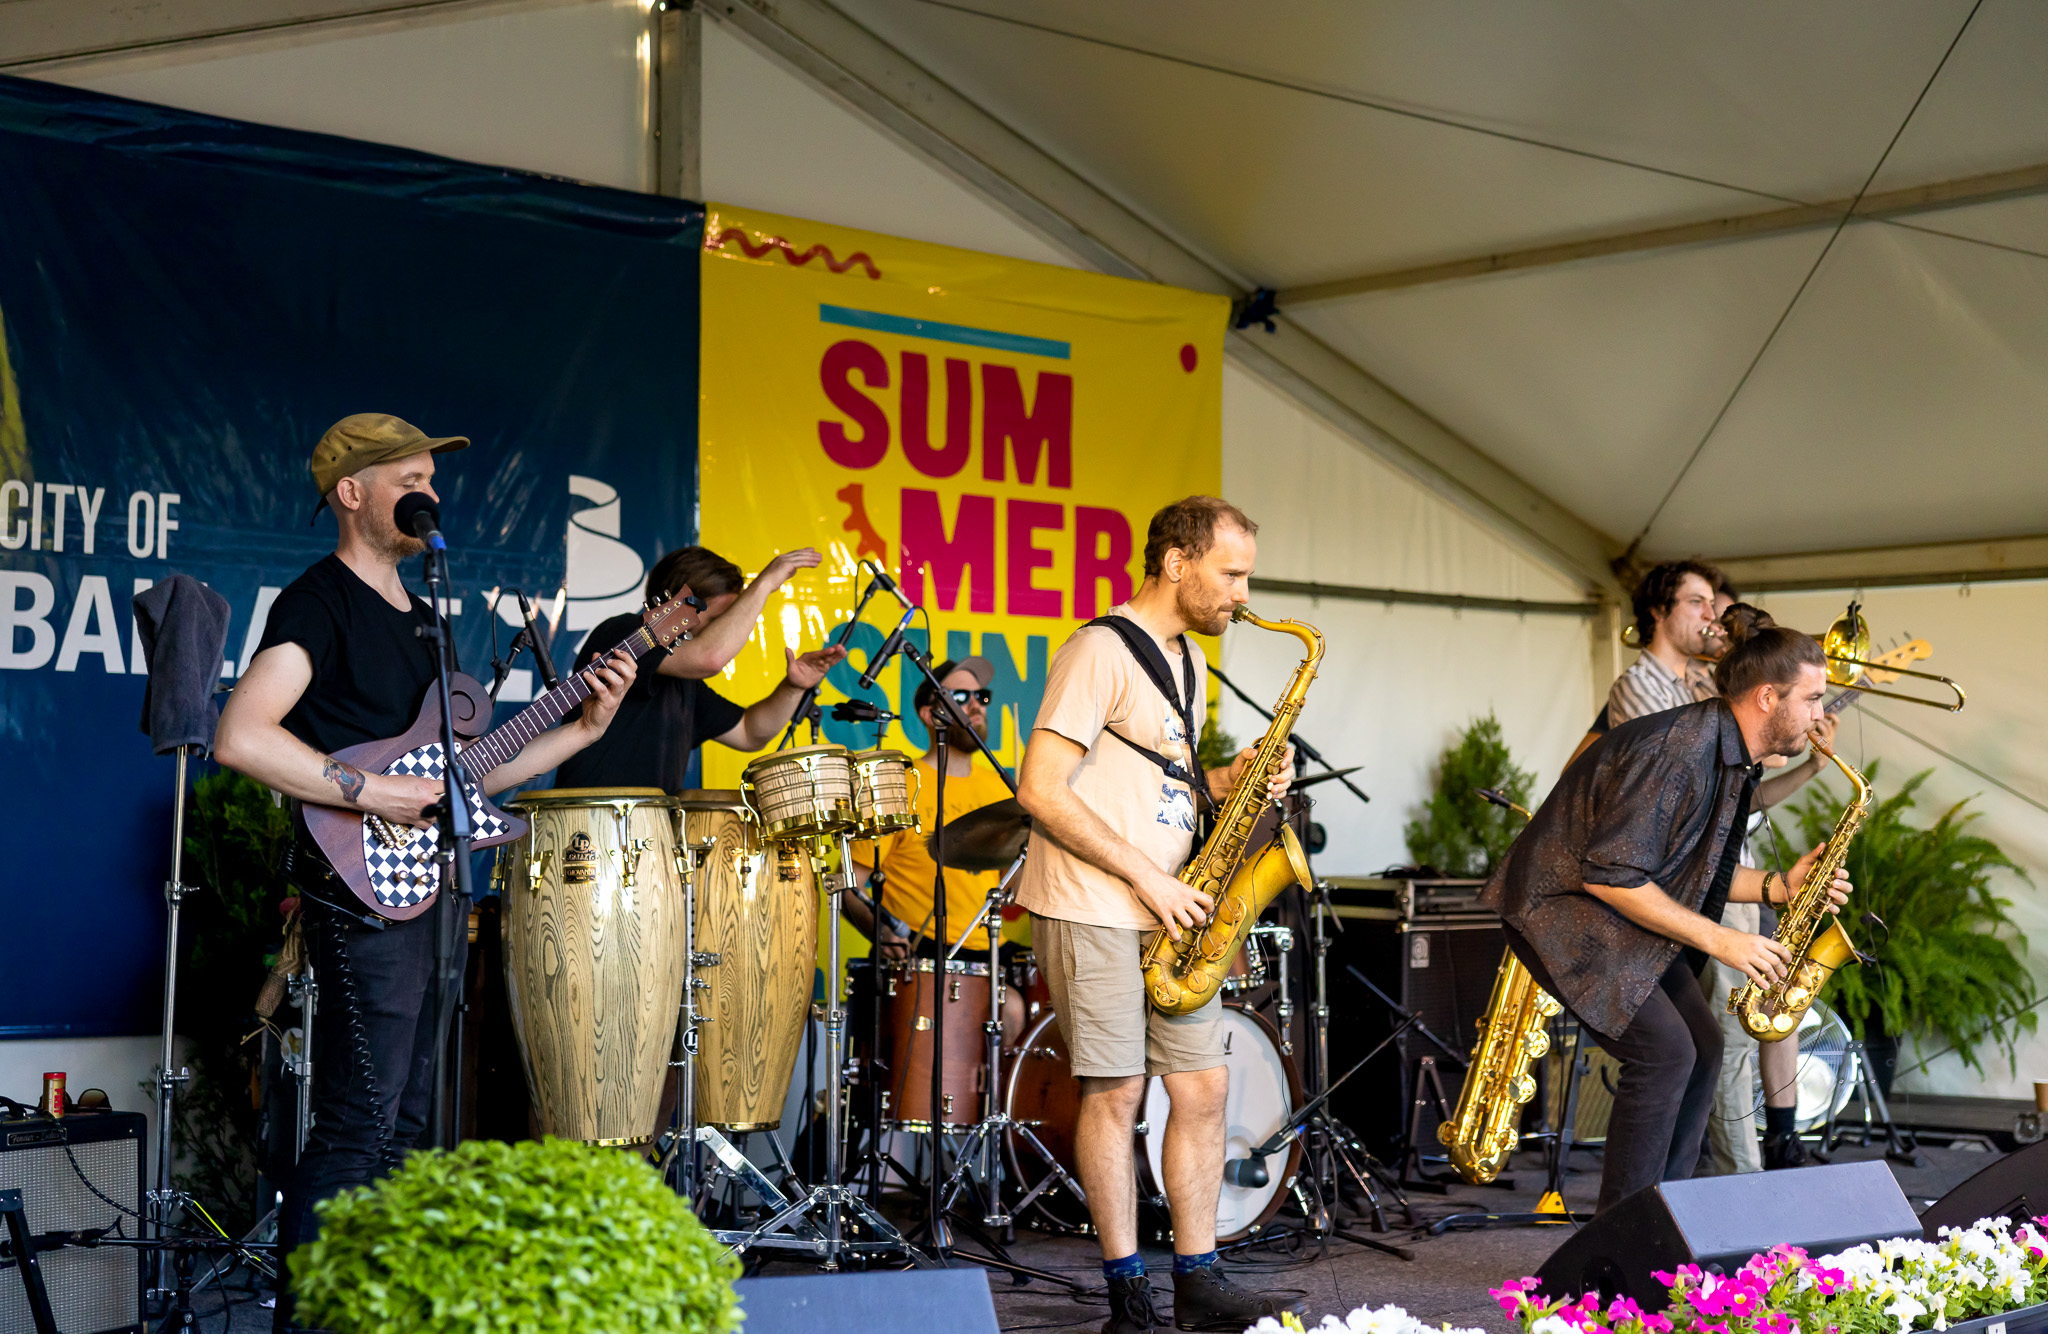 Band on stage at Summer Sundays event in week 1